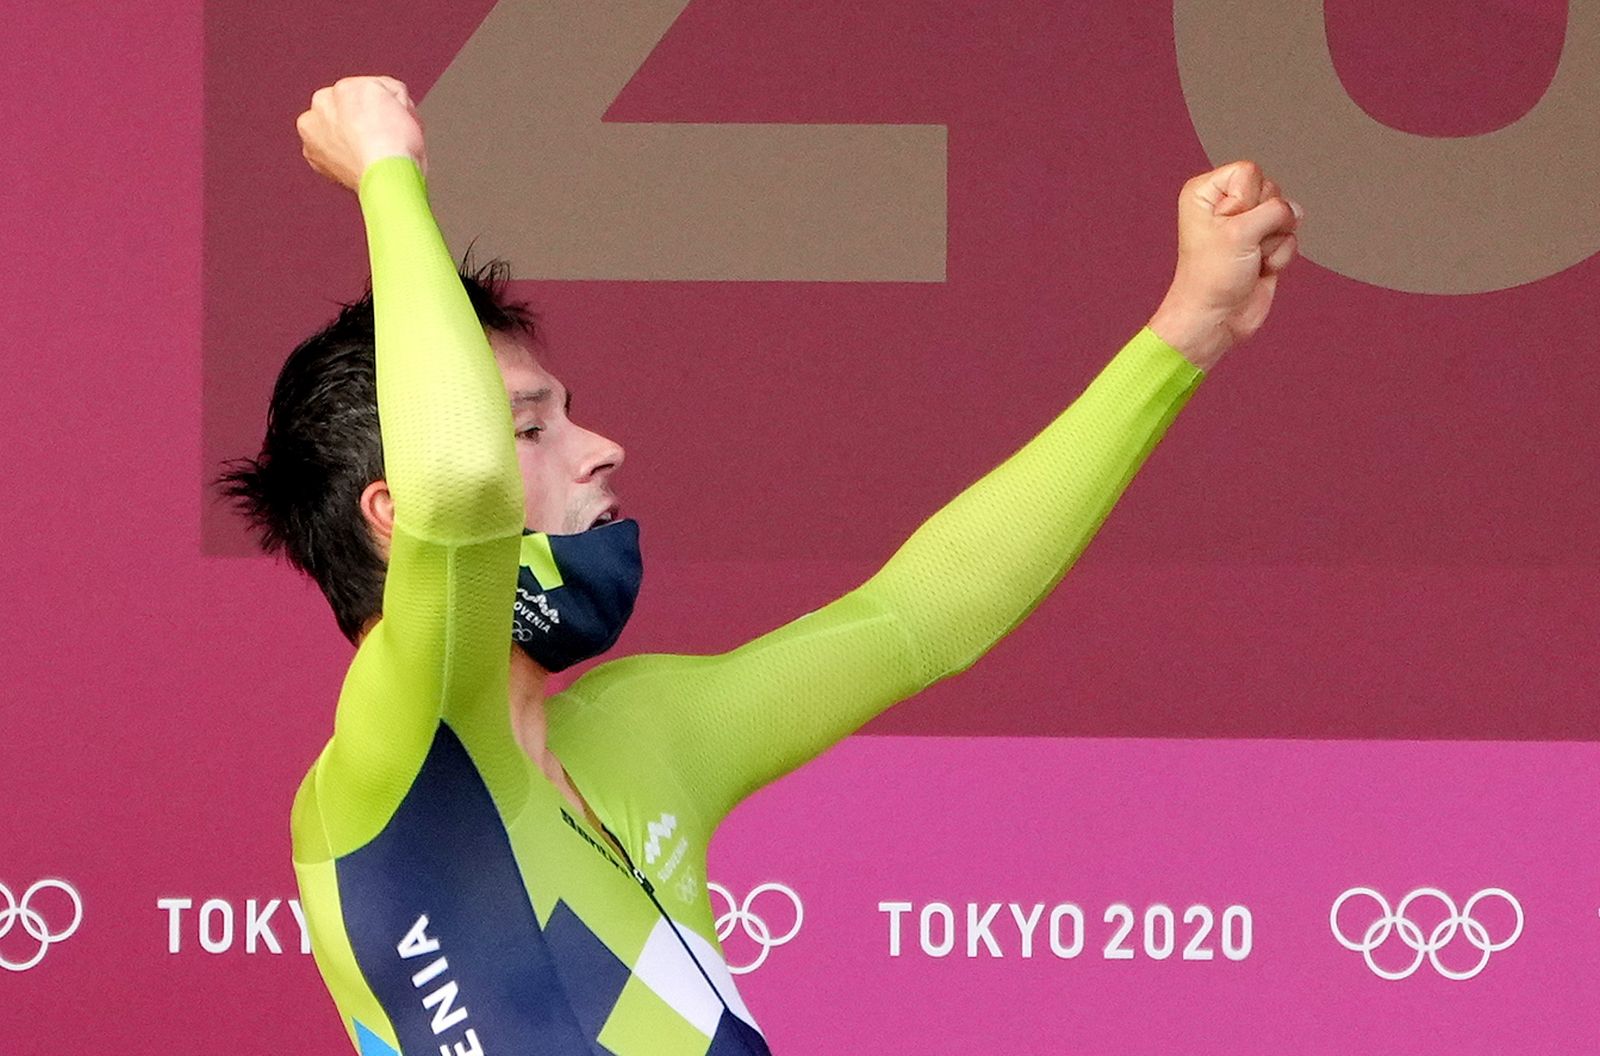 epa09372972 Primoz Roglic of Slovenia celebrates winning in the Men's Road Cycling Time Trial at the Tokyo 2020 Olympic Games at the Fuji International Speedway in Oyama, Japan, 28 July 2021.  EPA/CHRISTOPHER JUE